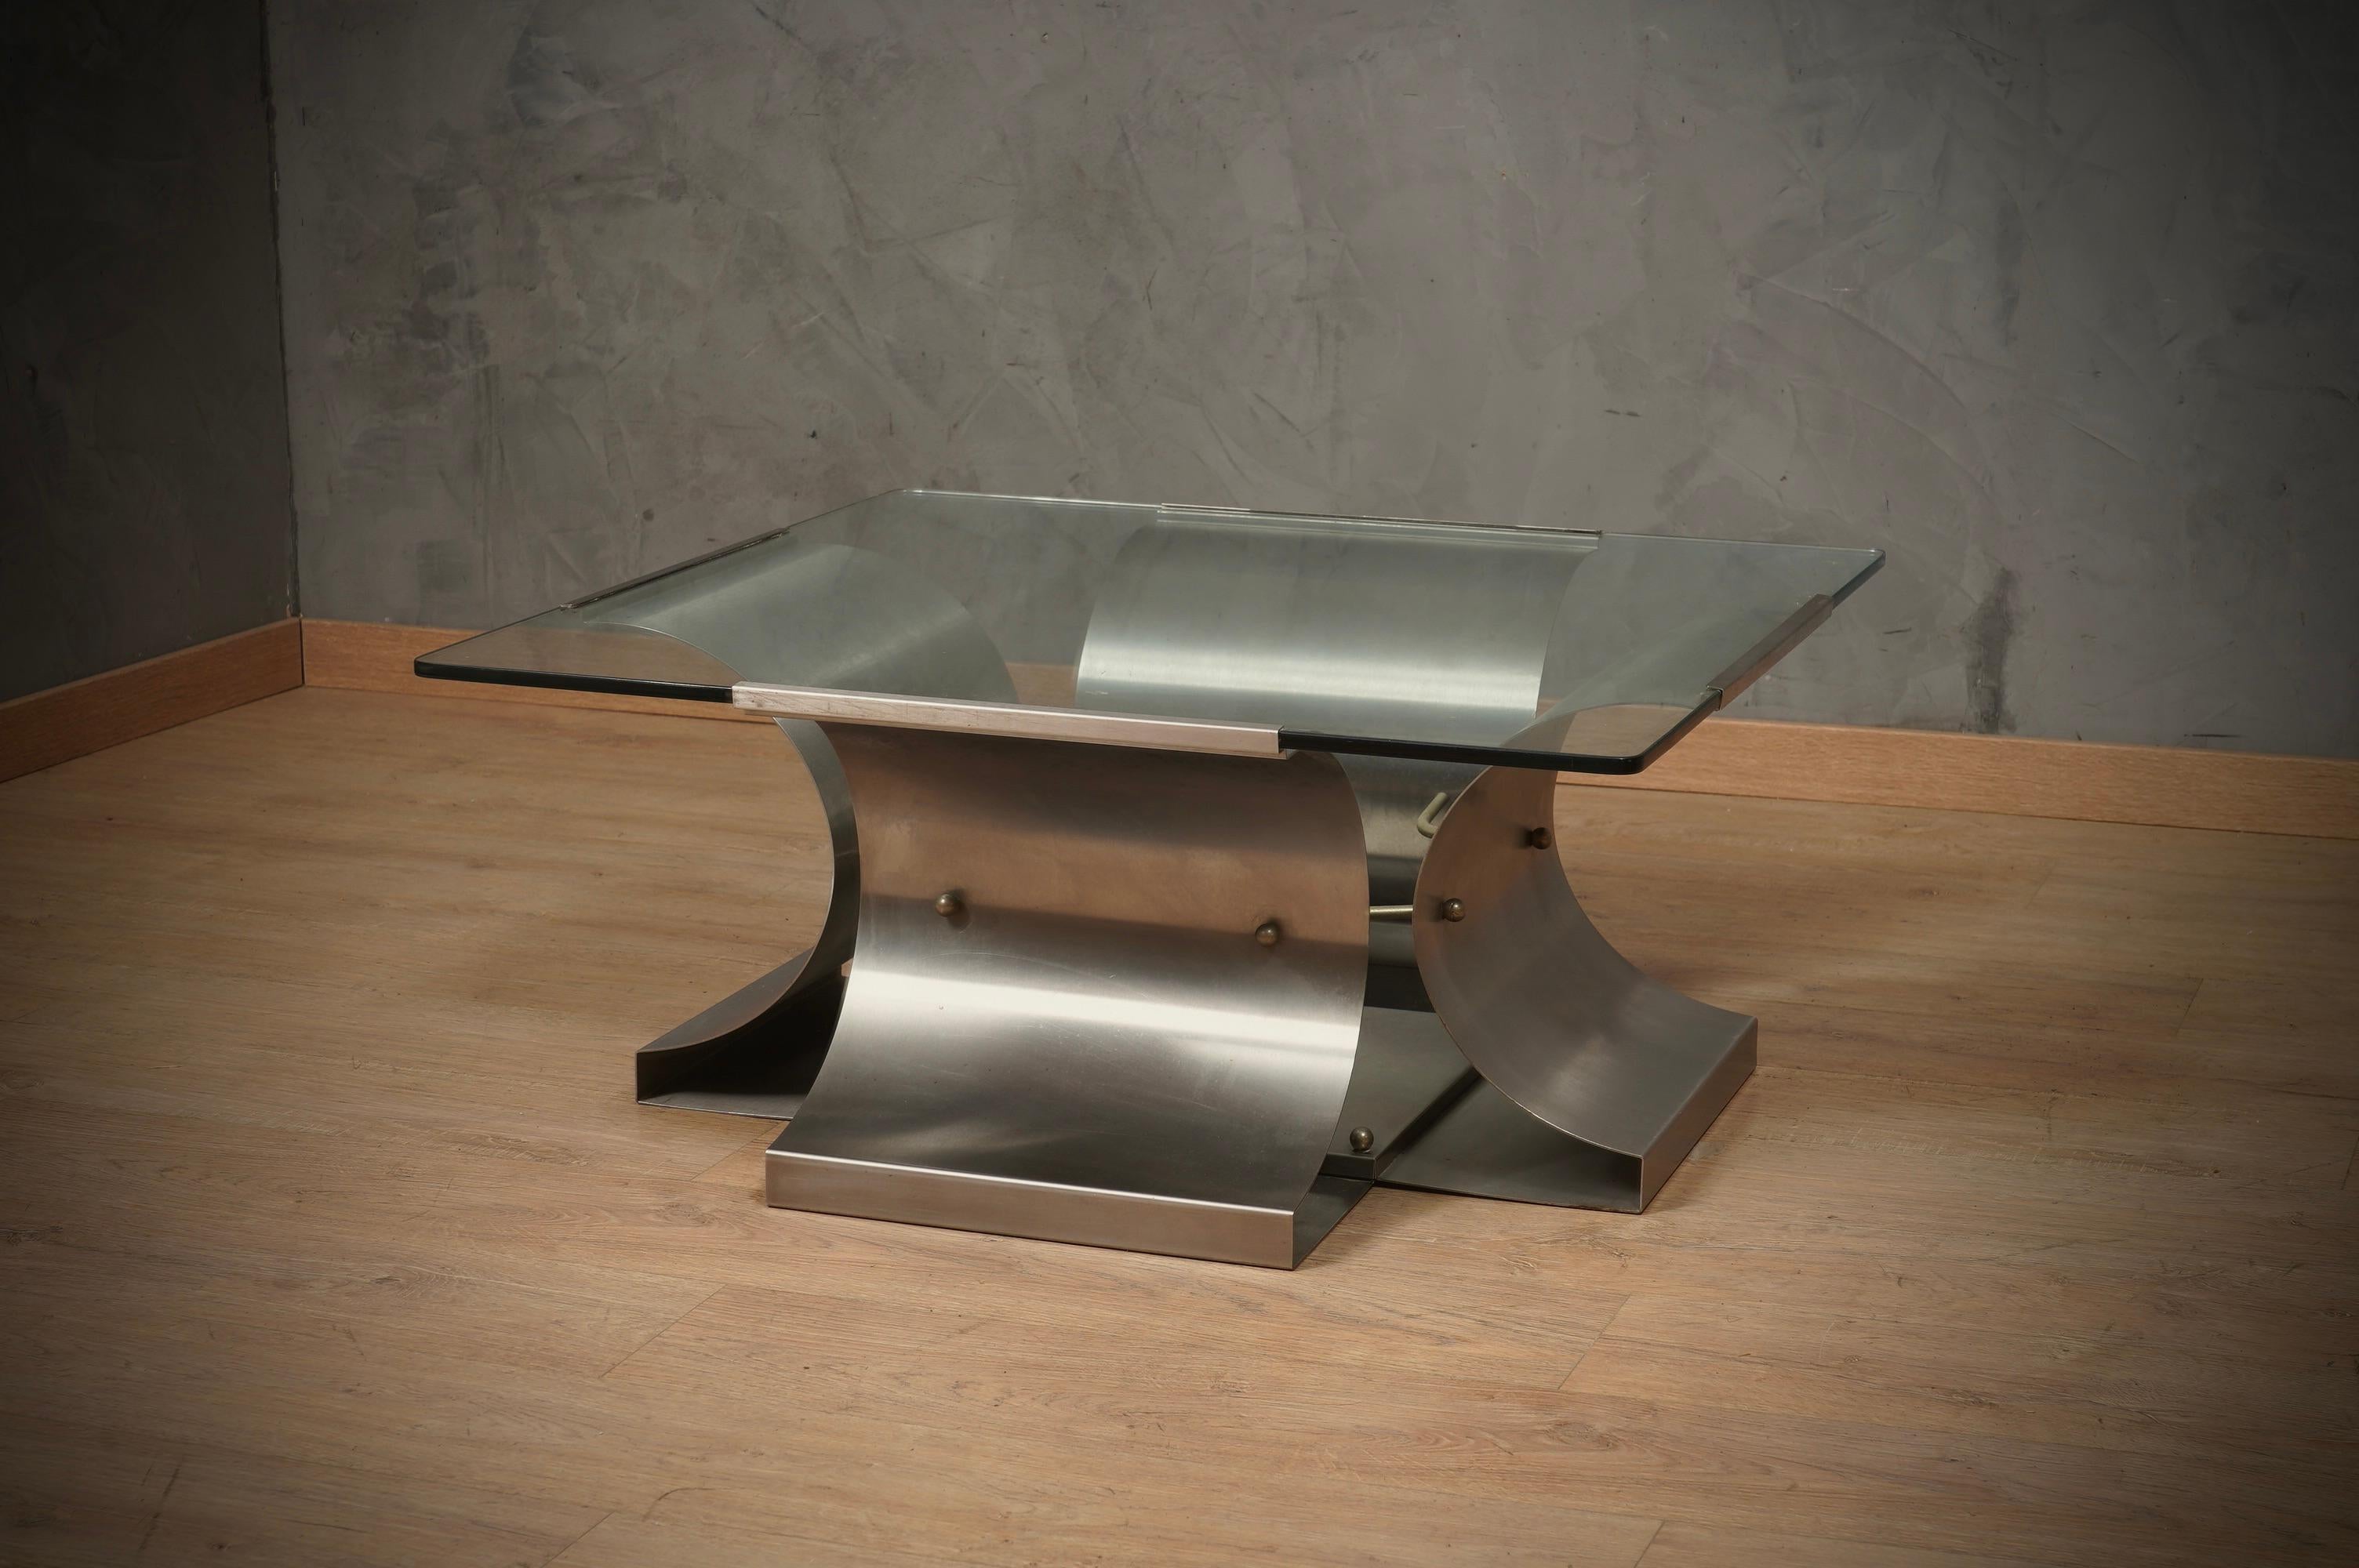 Francois Monnet Steel and Glass Mid-Century Sofa Table, 1970 For Sale 2